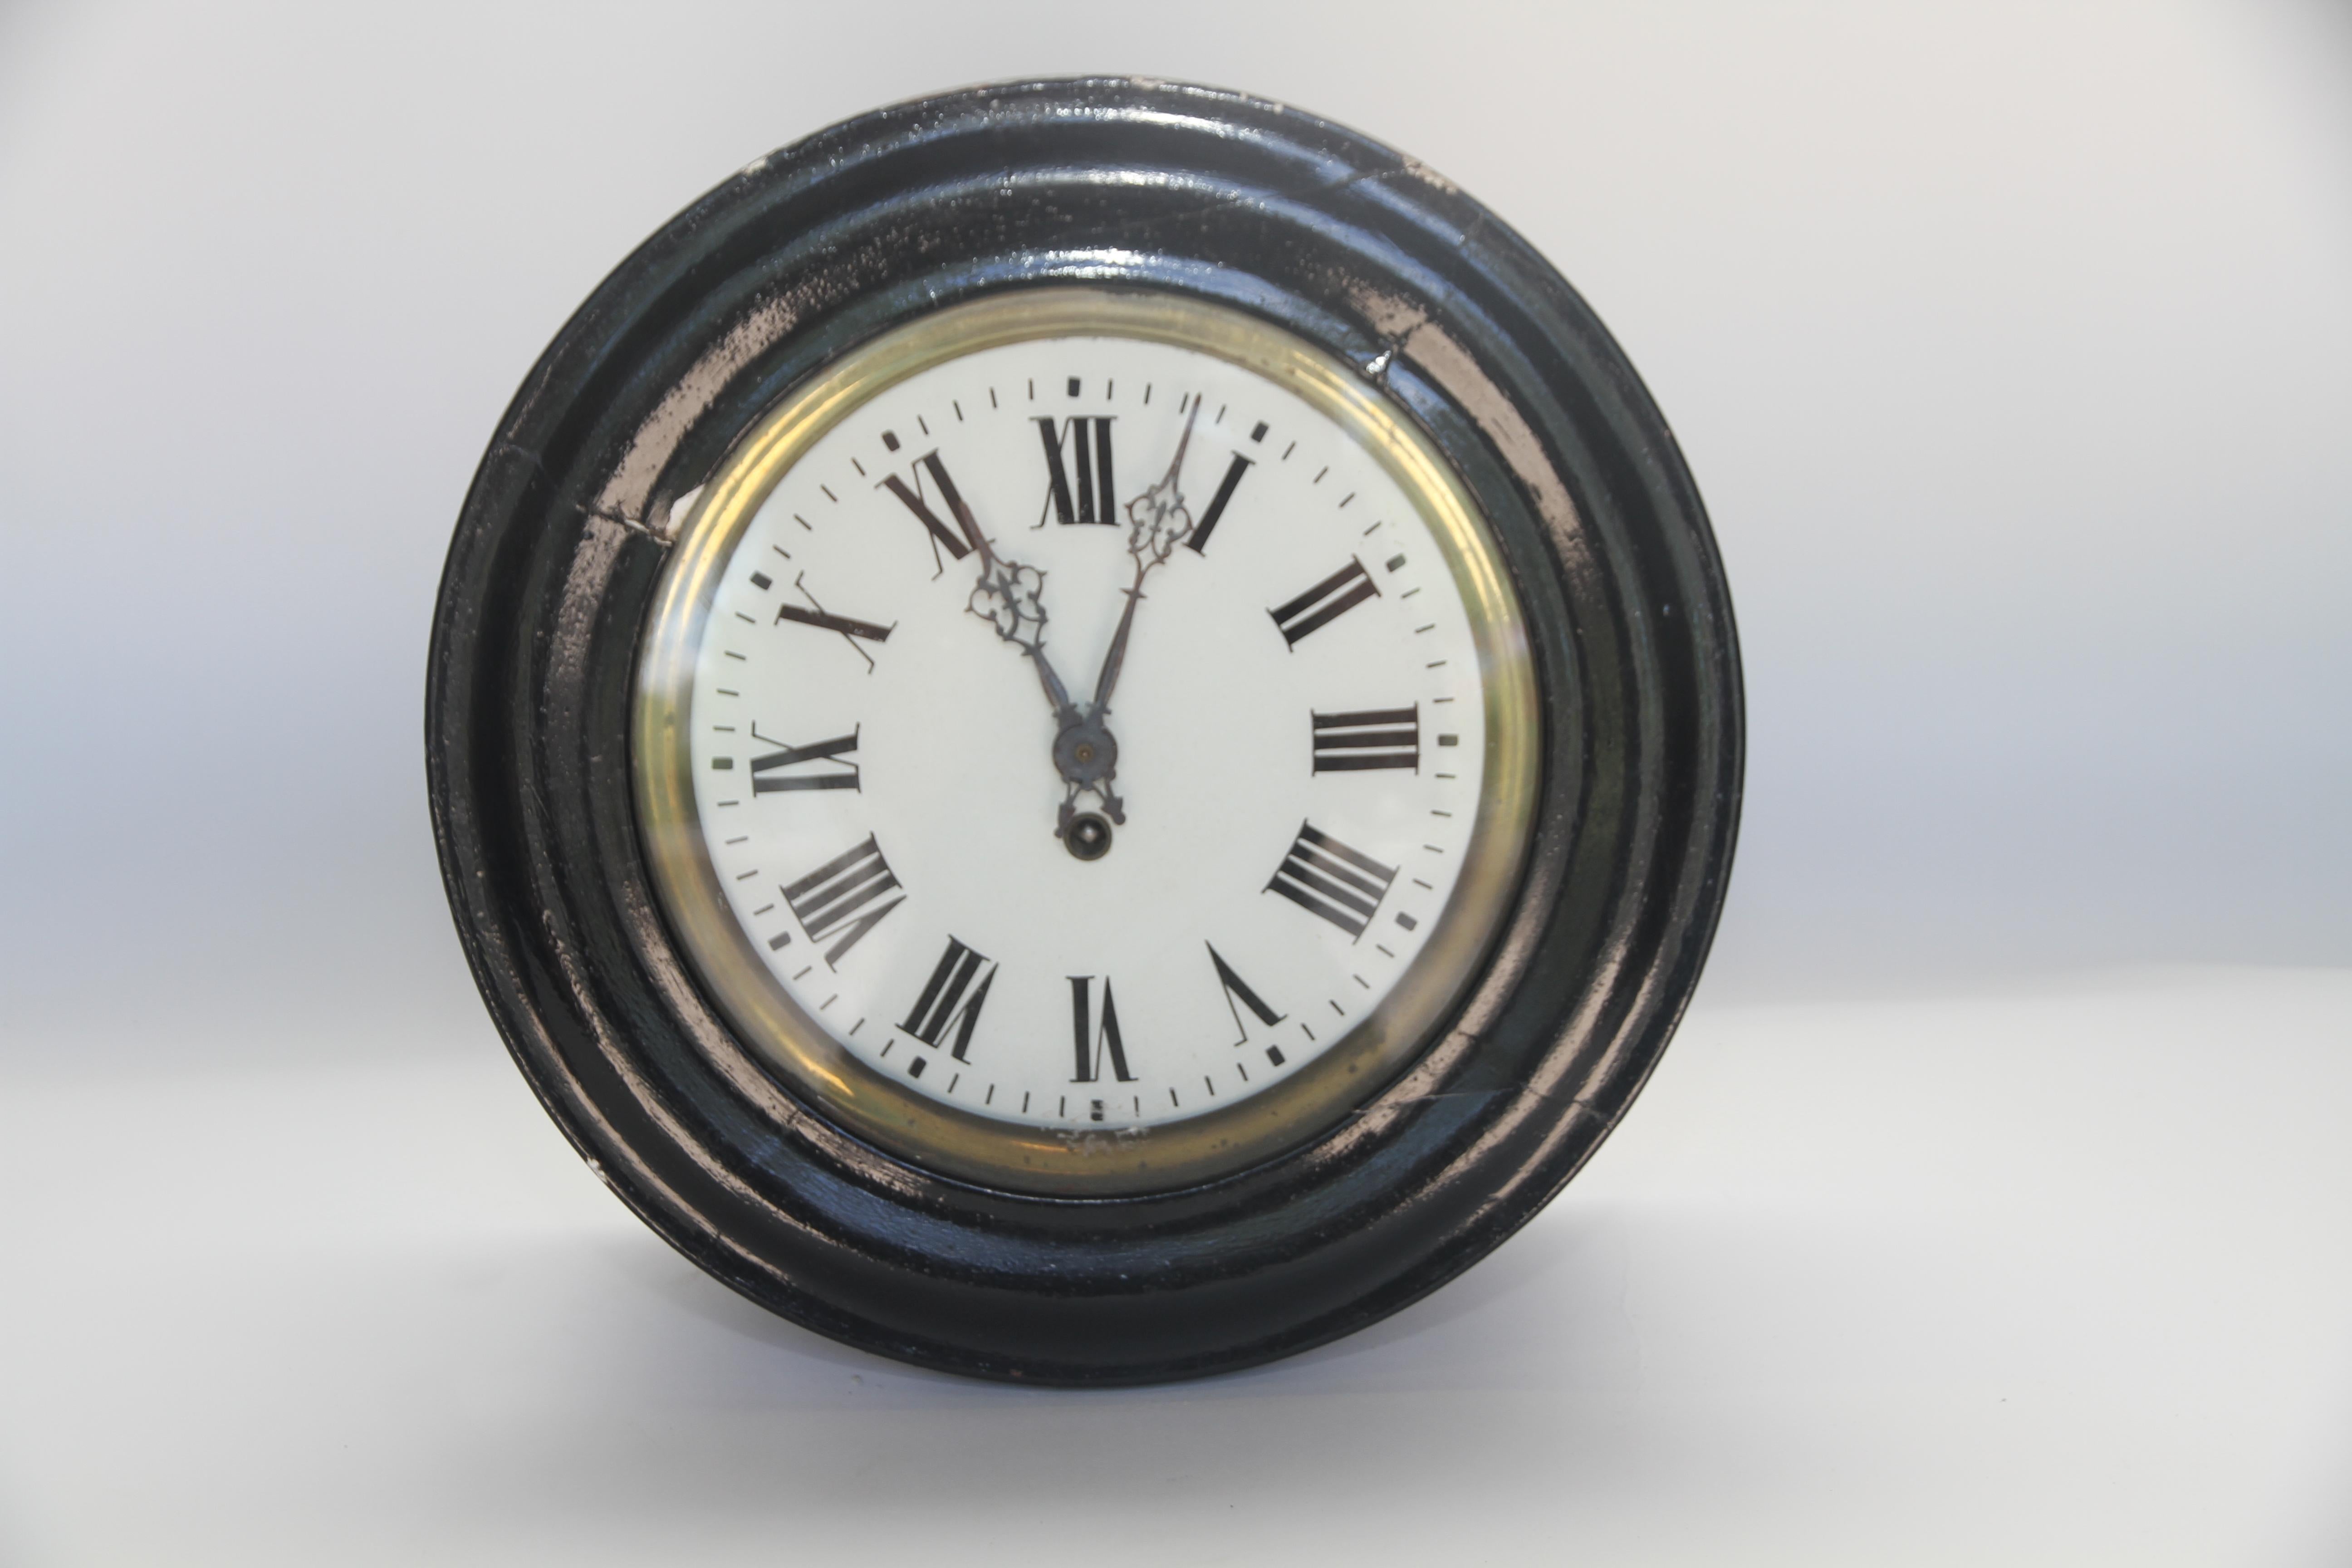 A lovely antique French wall clock made of brass and wood. The wood has been painted in a black gloss finish, the glass in the door is intact with a brass insert which surrounds the glass face of the clock when closed. The face is decorated with